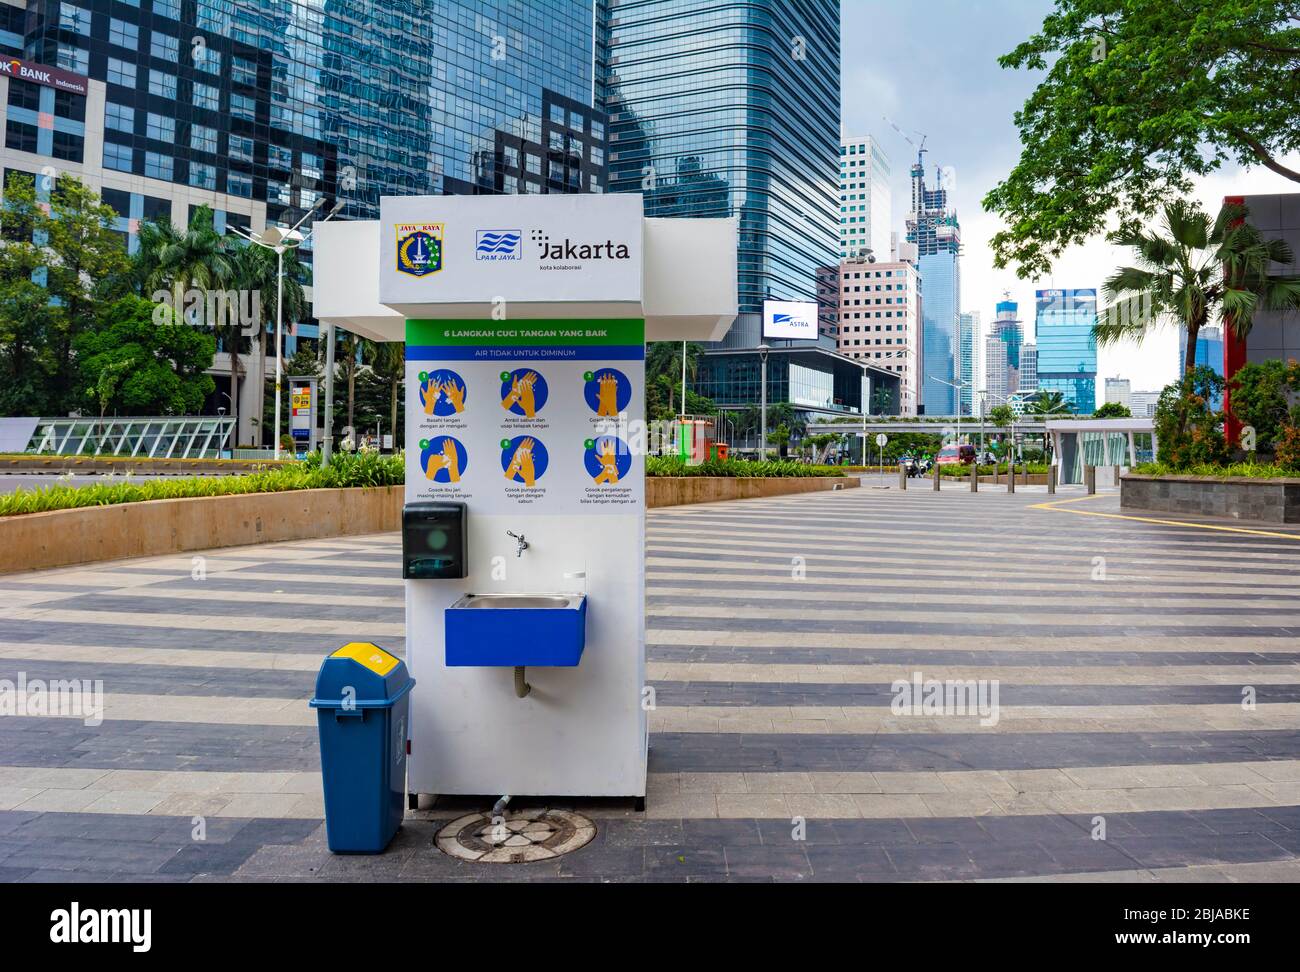 Jakarta, Indonesia - 3rd Apr 2020: Portable washbasin in Central Jakarta, Indonesia. Washing hands often is a way to reduce covid-19 pandemic. Stock Photo